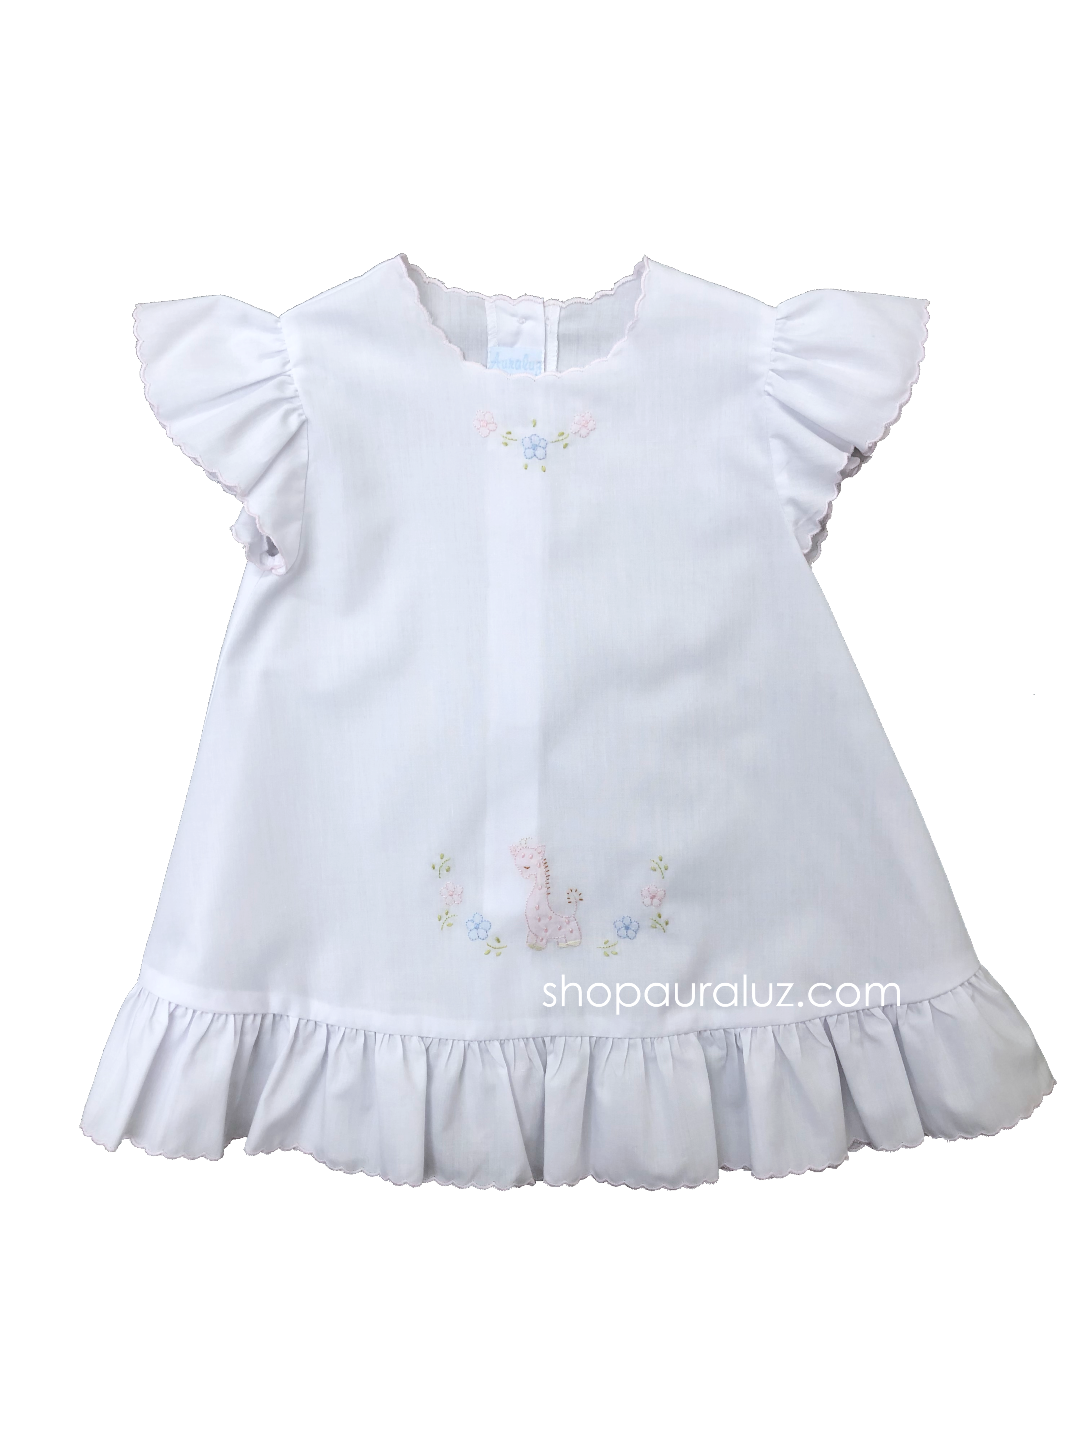 Auraluz Baby Dress..White with ruffle sleeve/hem and pink embroidered giraffe